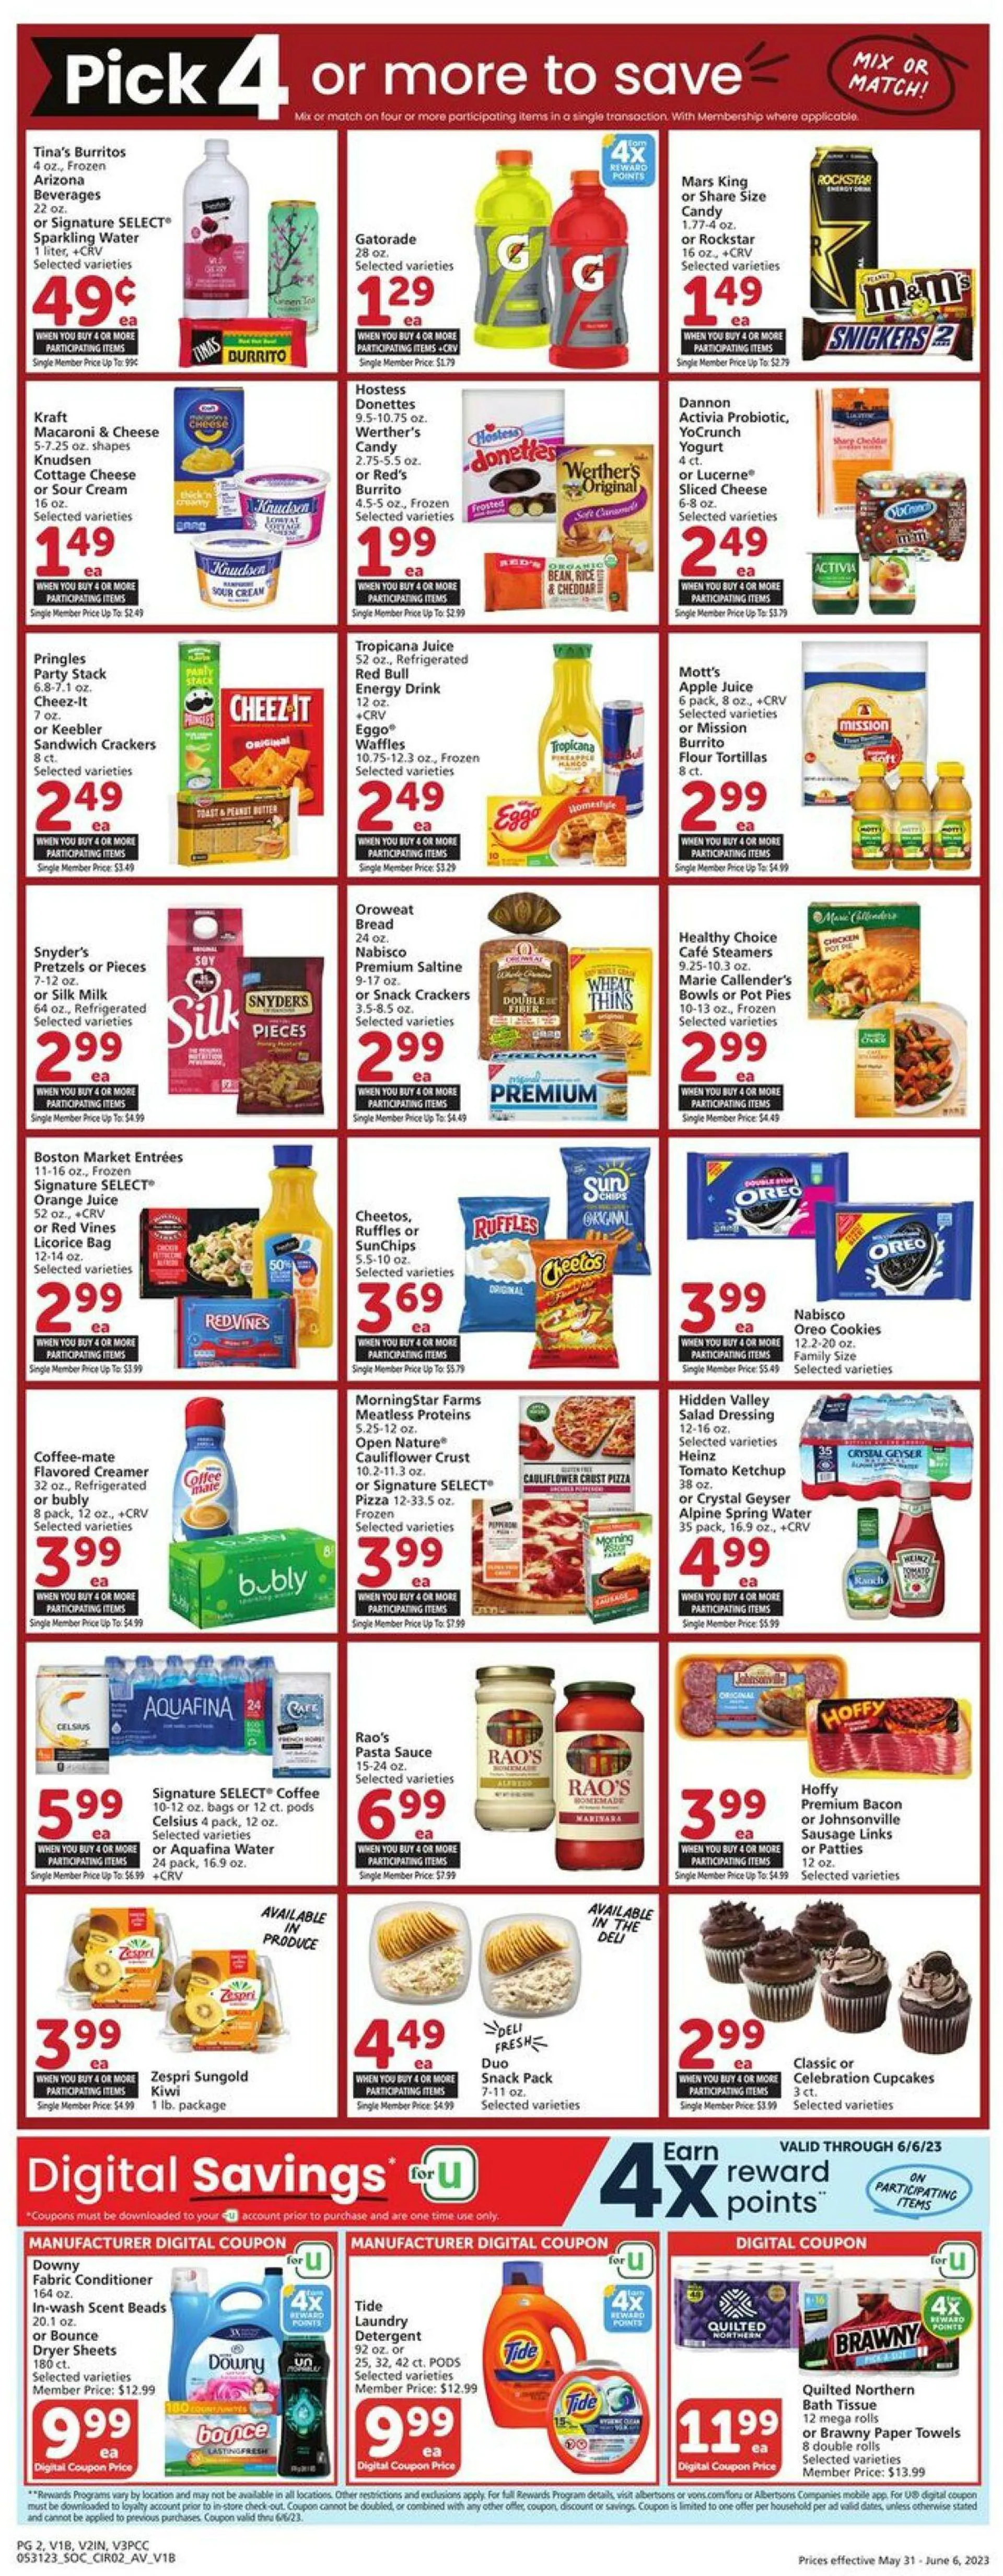 Vons Current weekly ad - 2